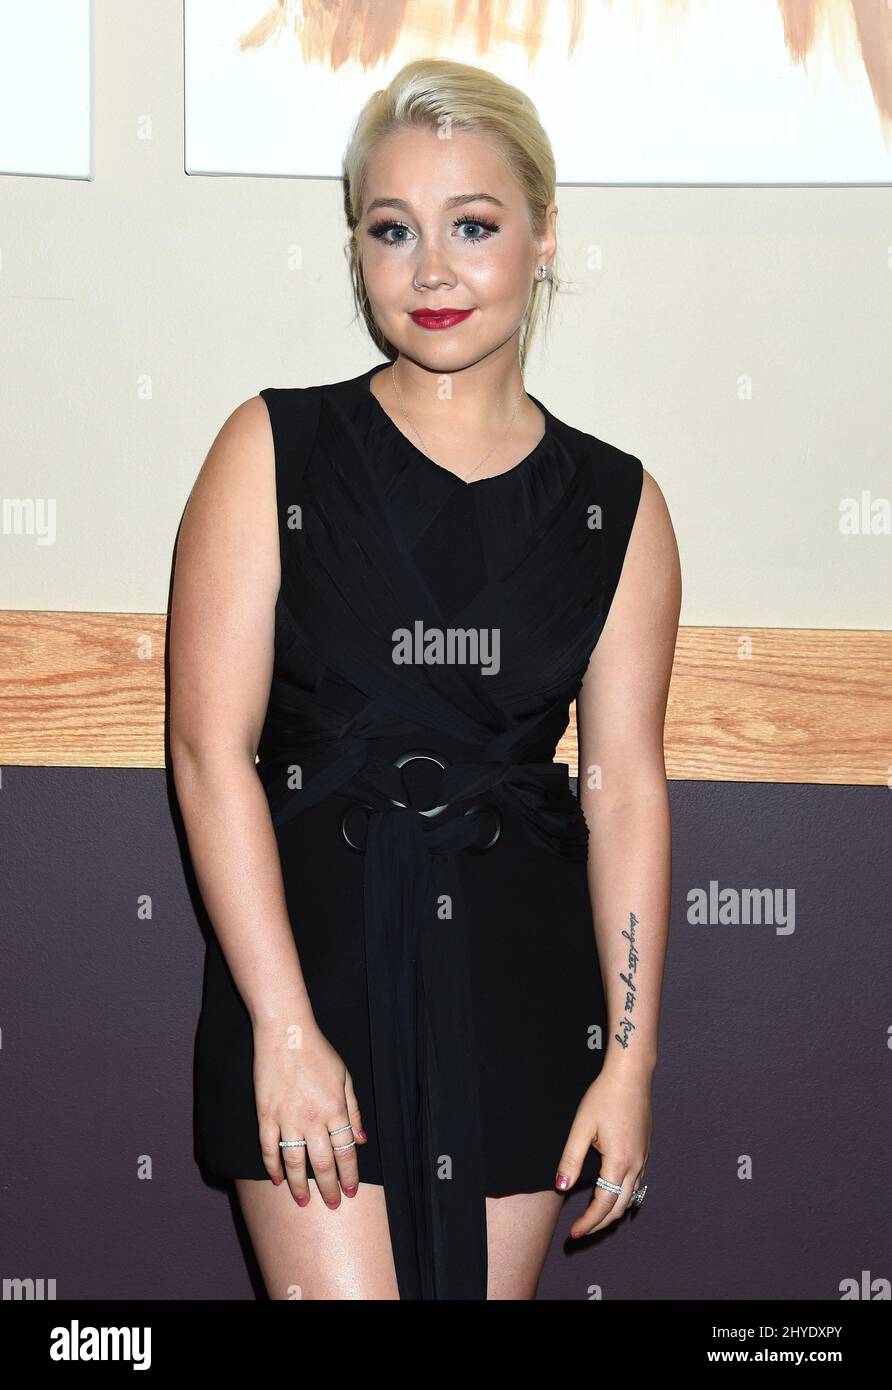 RaeLynn attending the 2017 CMT Next Women of Country Celebration held at City Winery Stock Photo